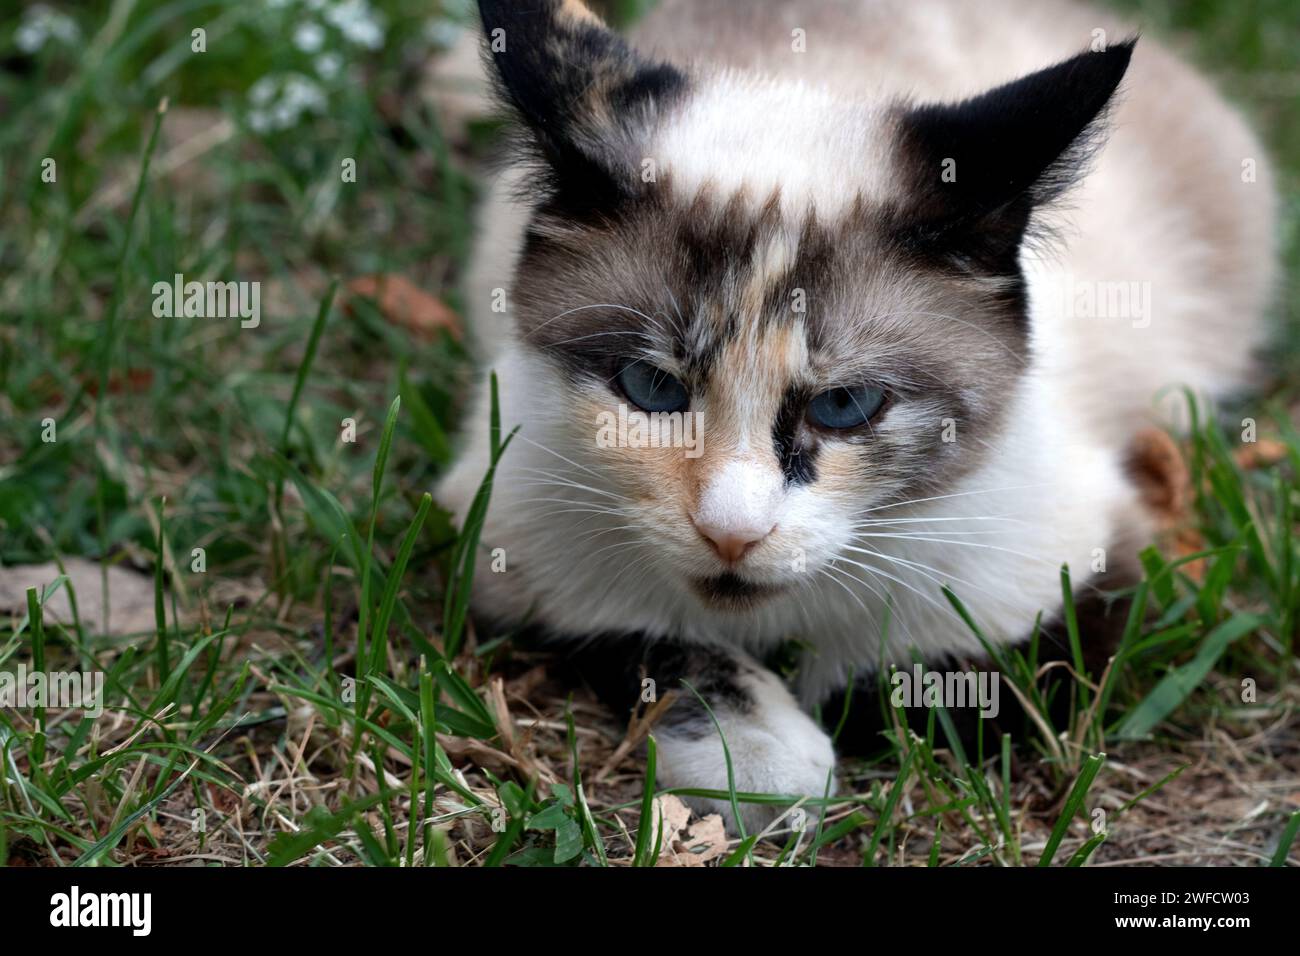 pet, animal, cat, outdoor, cute, portrait, horizontal, fur, domestic cat, eye, domestic, grass, photography, looking, no people, one animal, nature, d Stock Photo